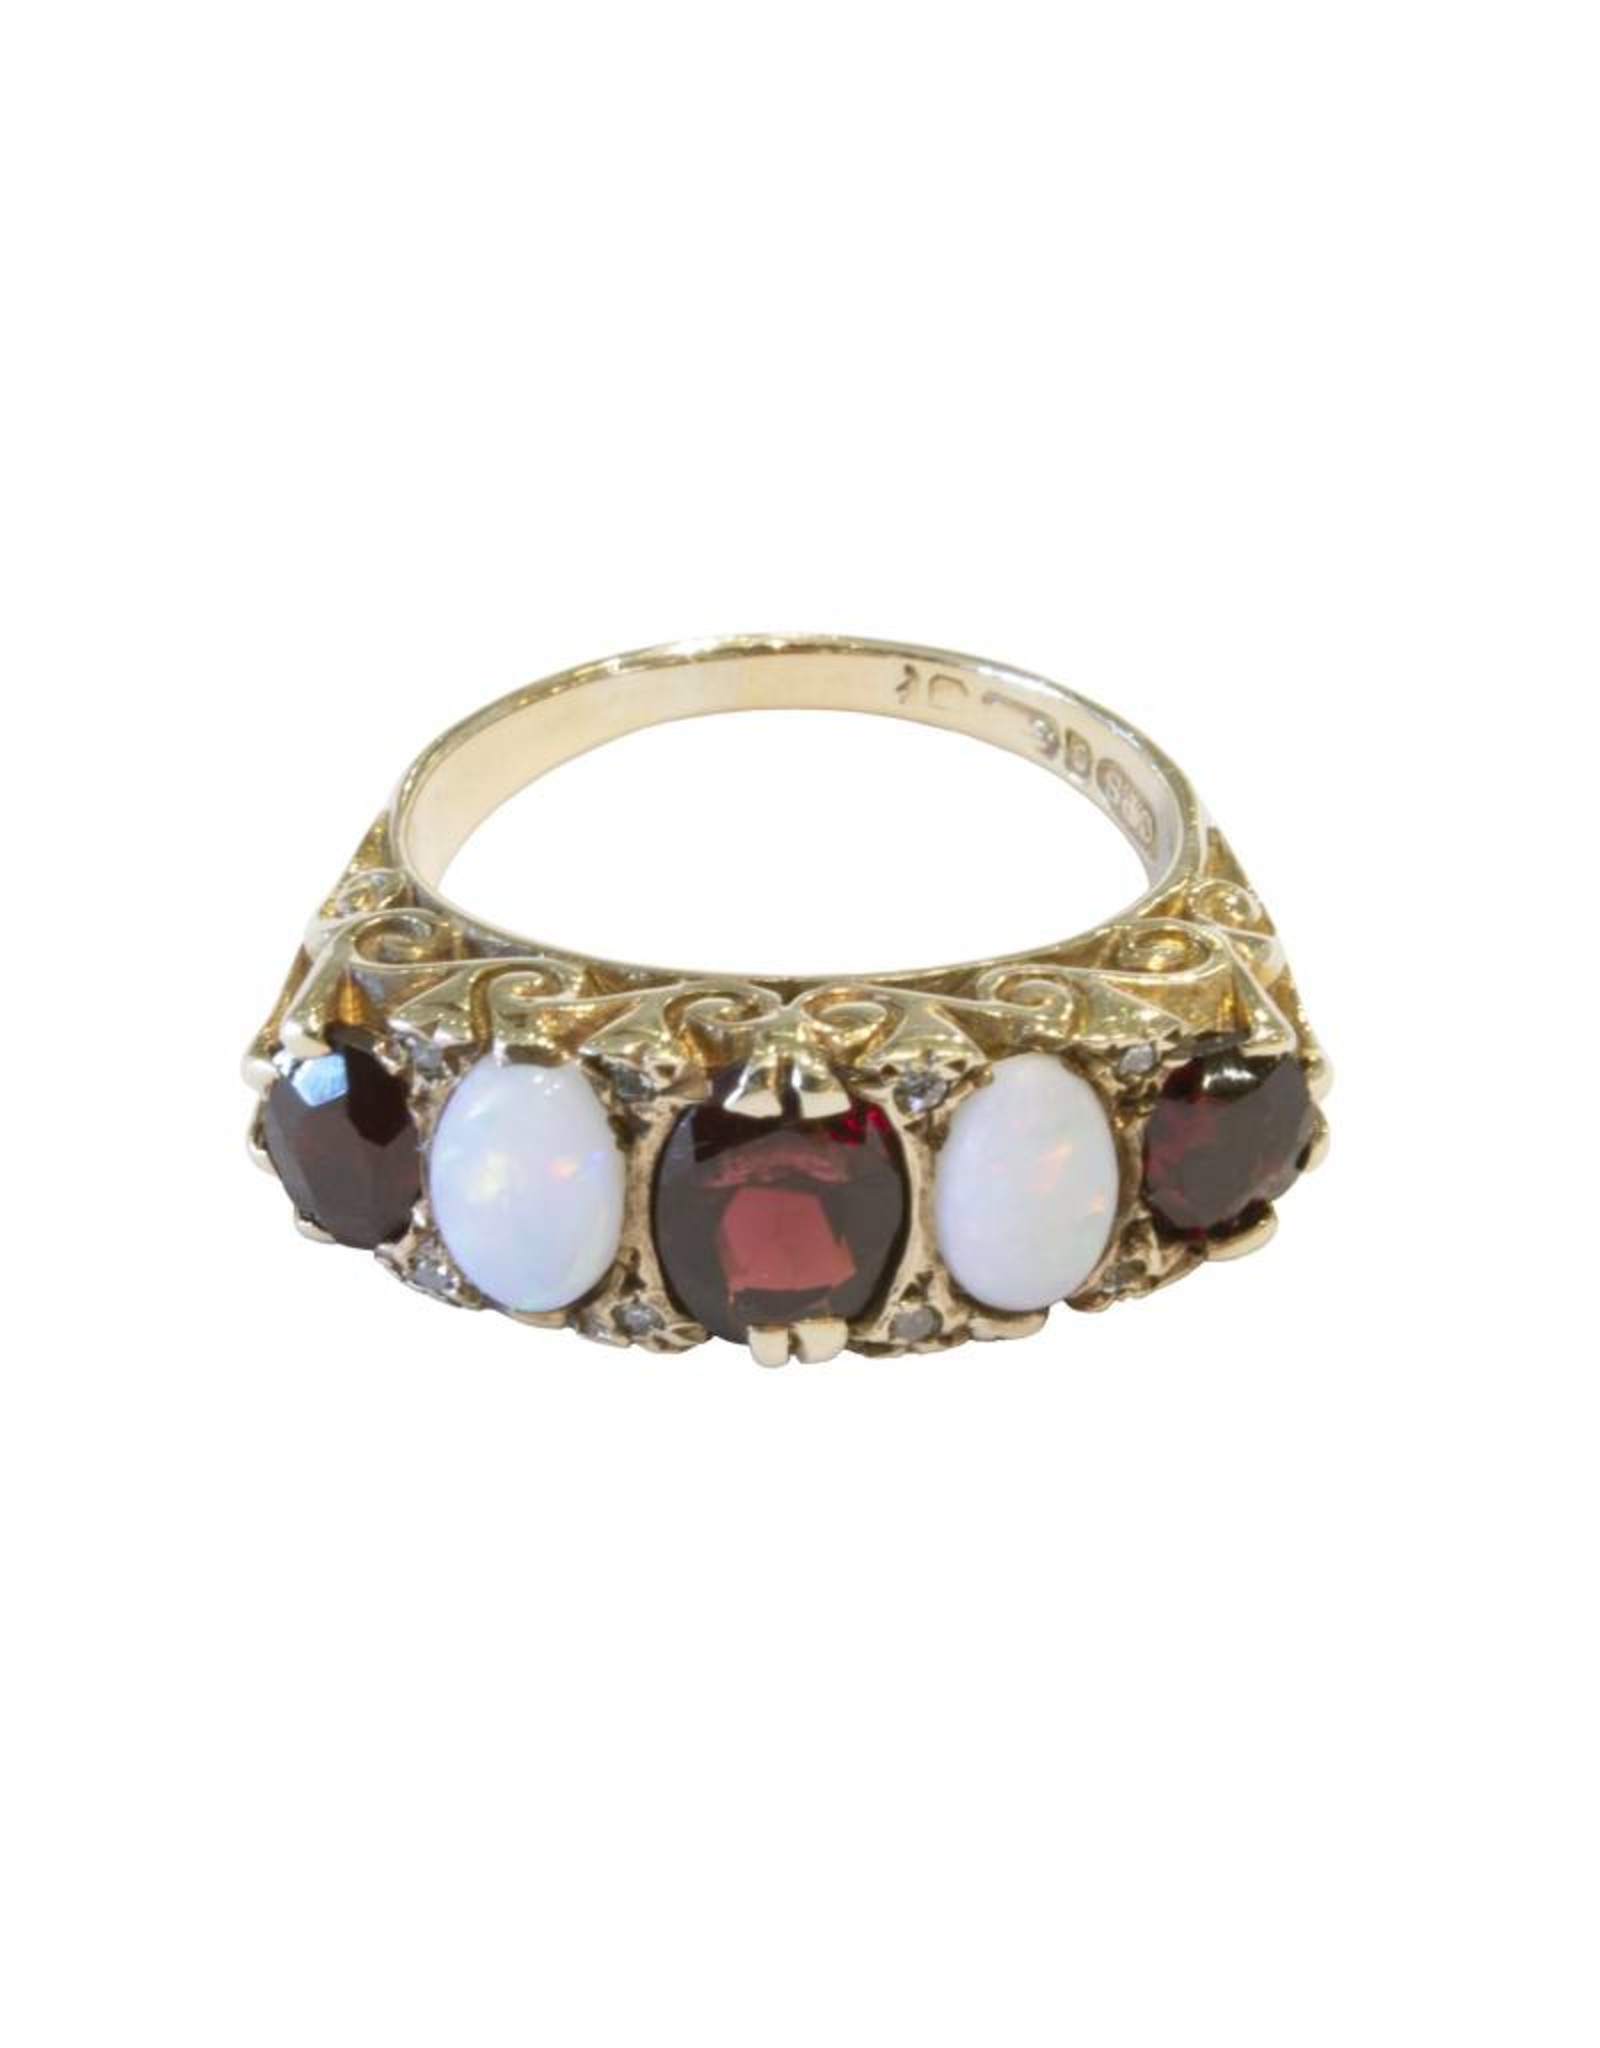 Antique Five Stone 9 Ct. Gold Ring - Opal + Garnet - Size 6 (~1900)